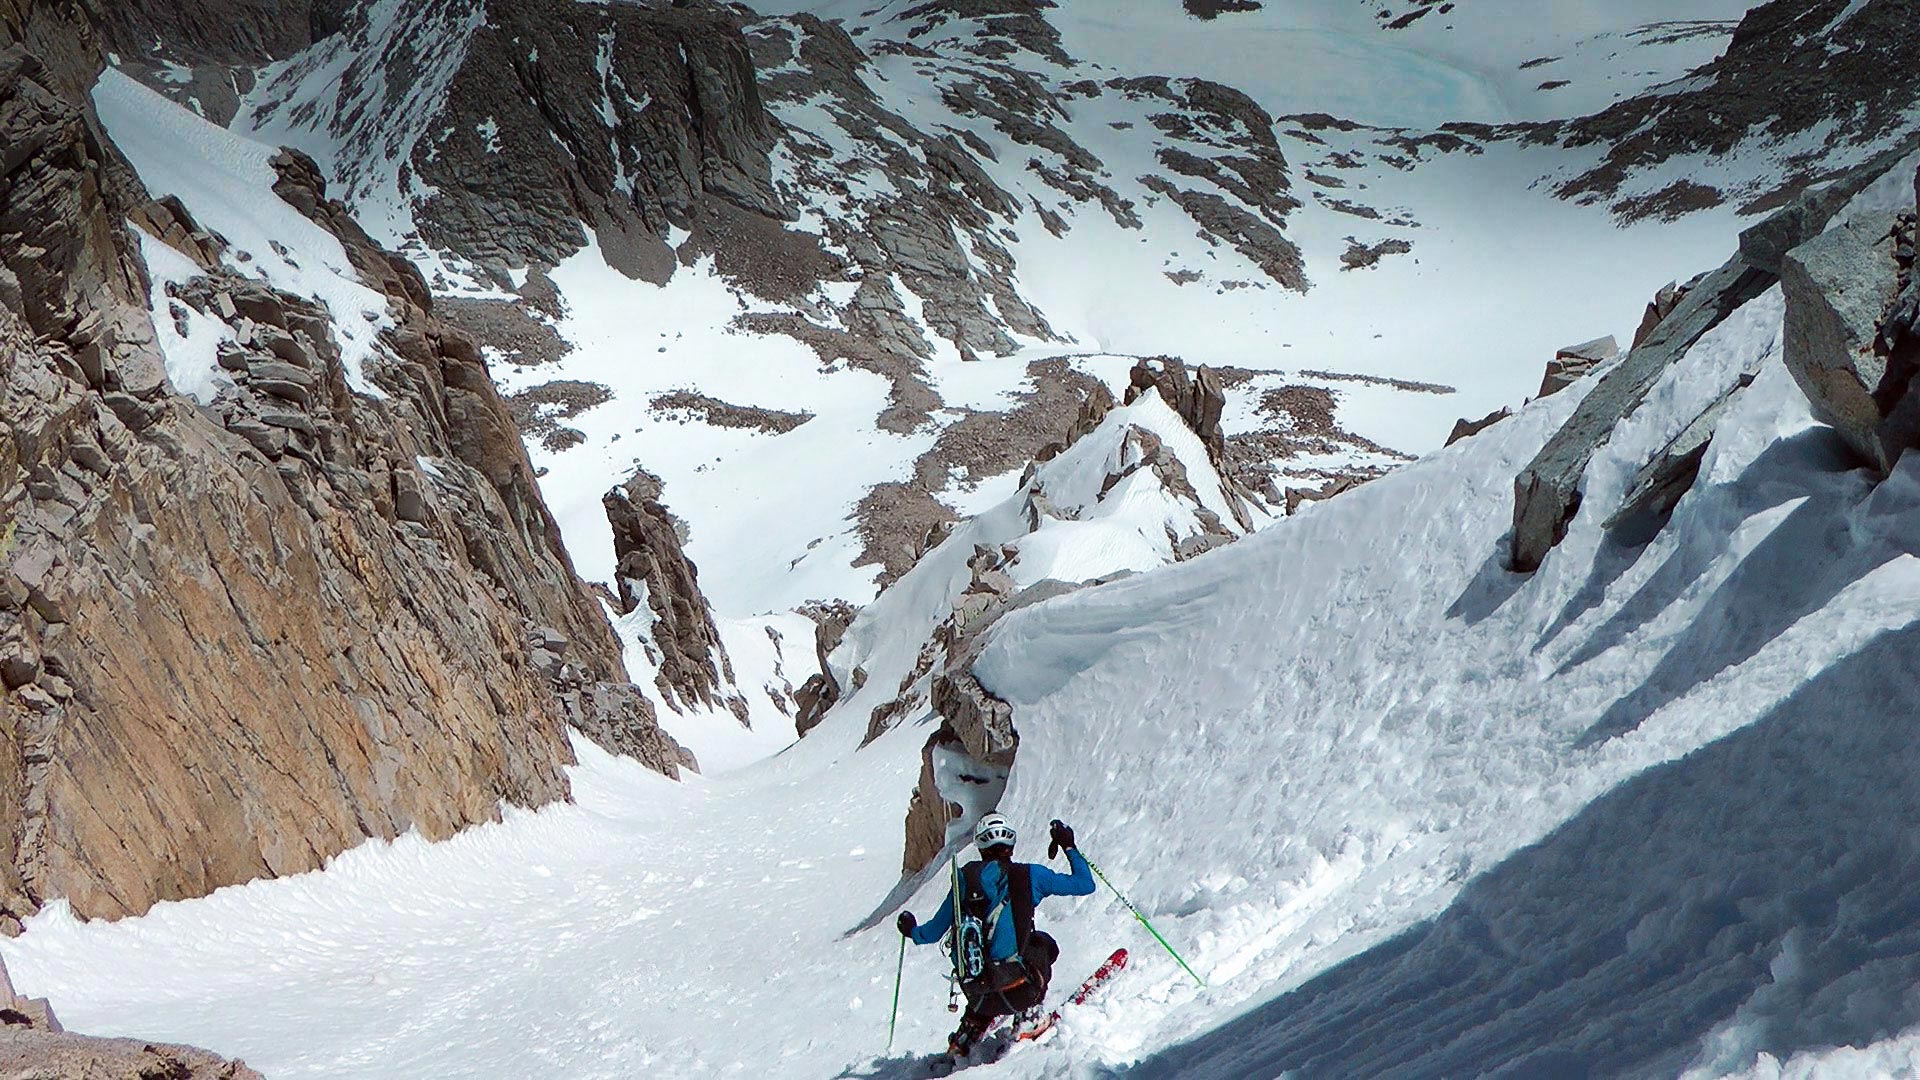 Andy Lewicky skiing Mount Muir's East Buttress